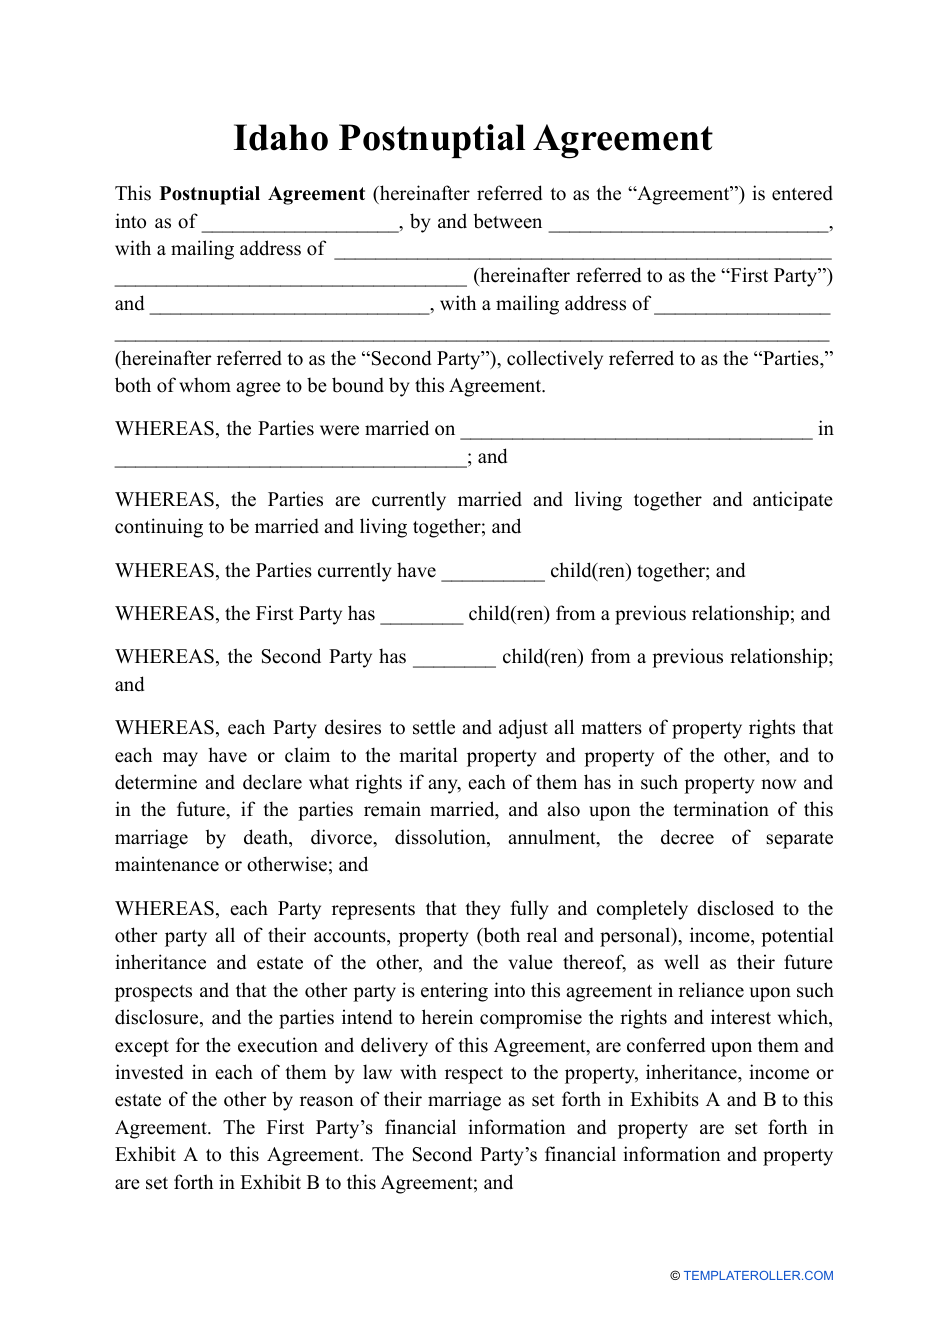 Postnuptial Agreement Template - Idaho, Page 1